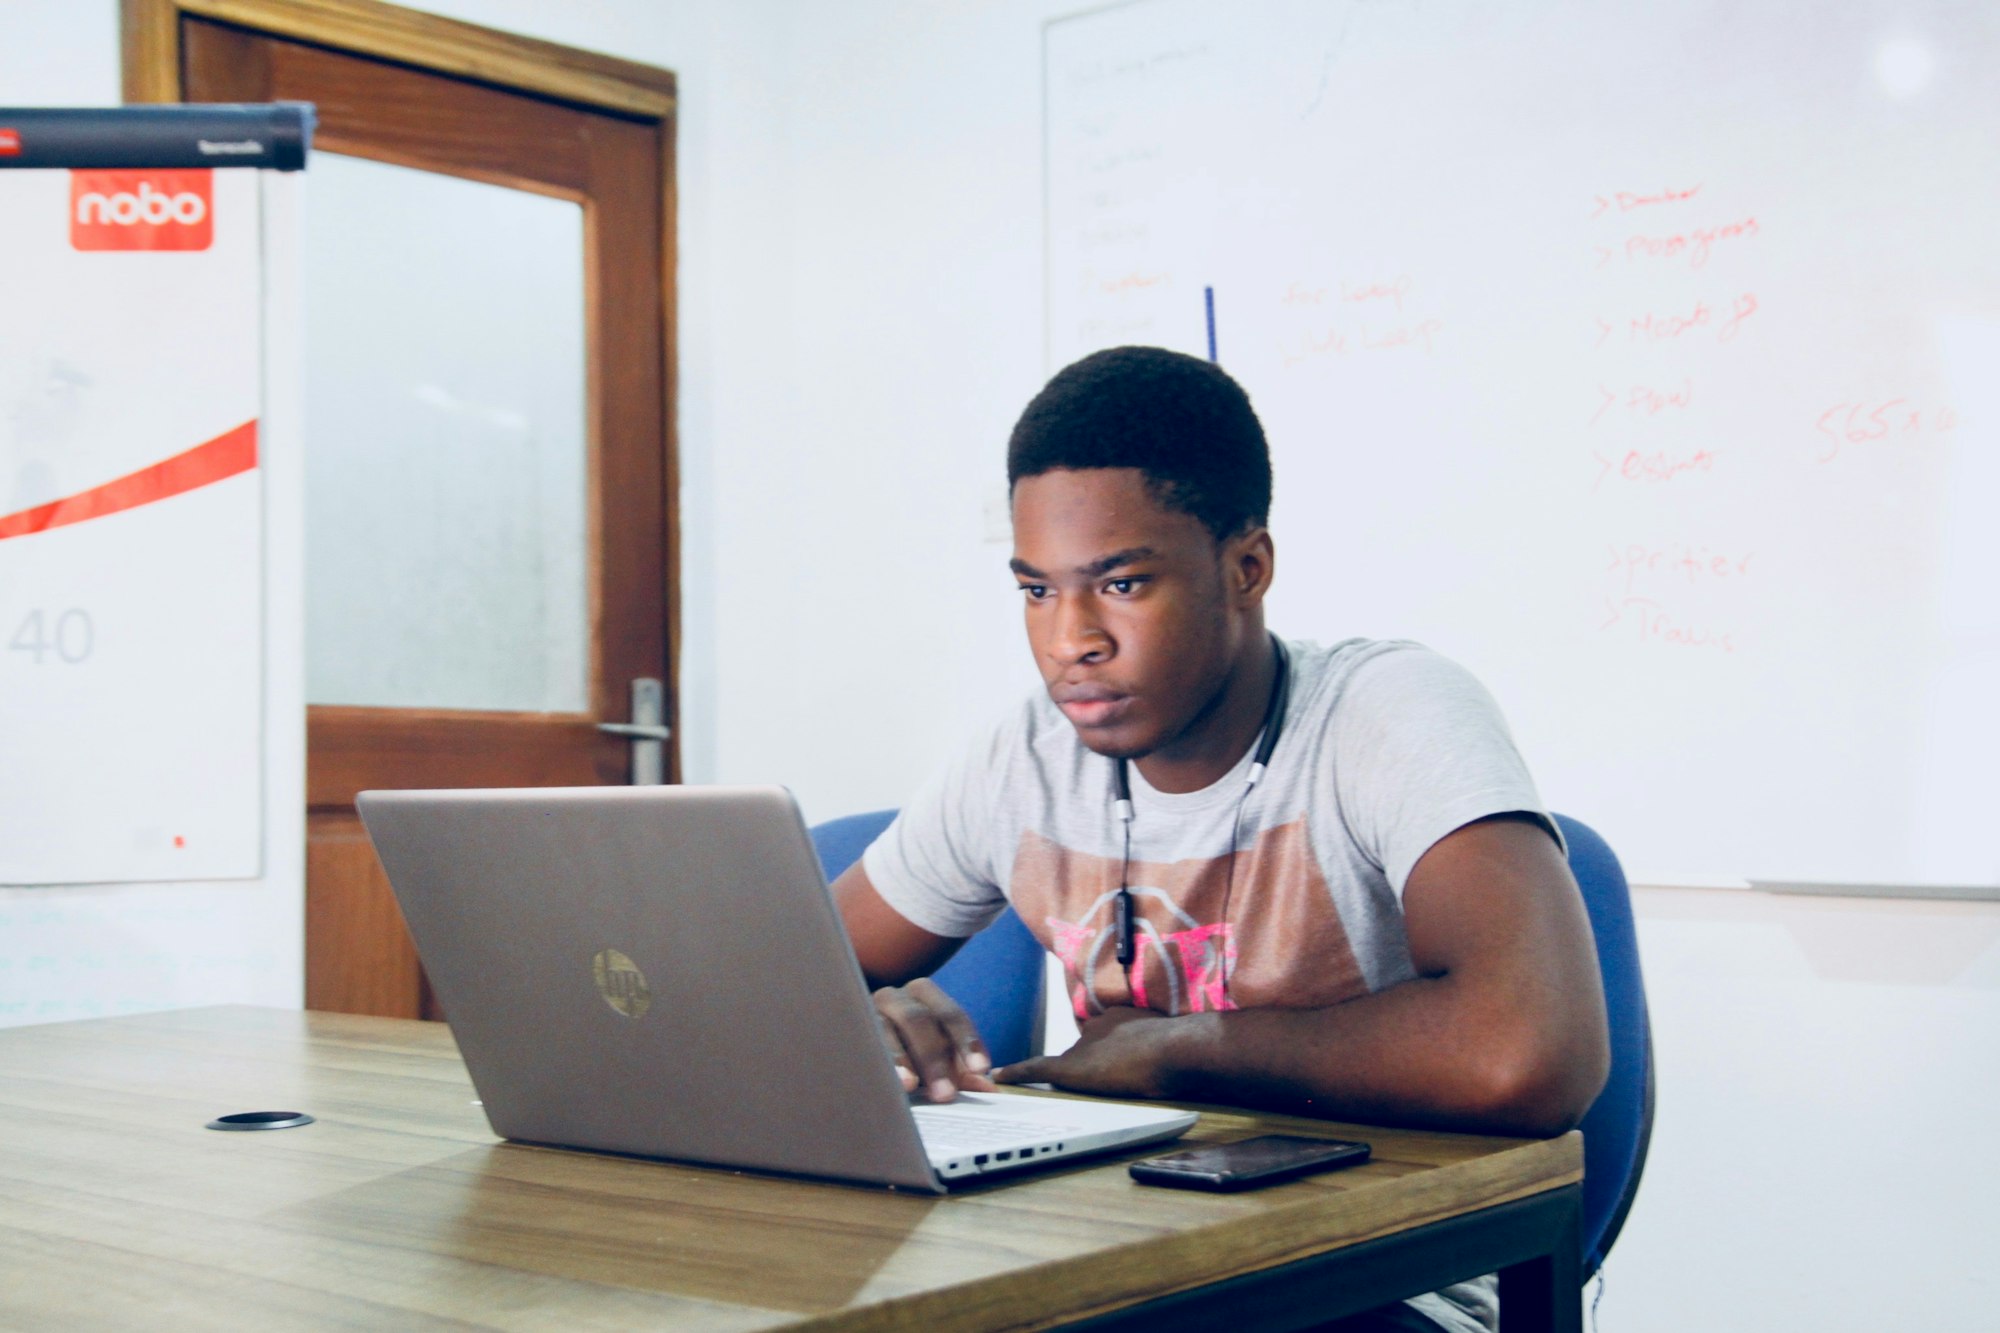 Coursera's new partnership could help upskill millions of Nigerians in high-demand IT skills